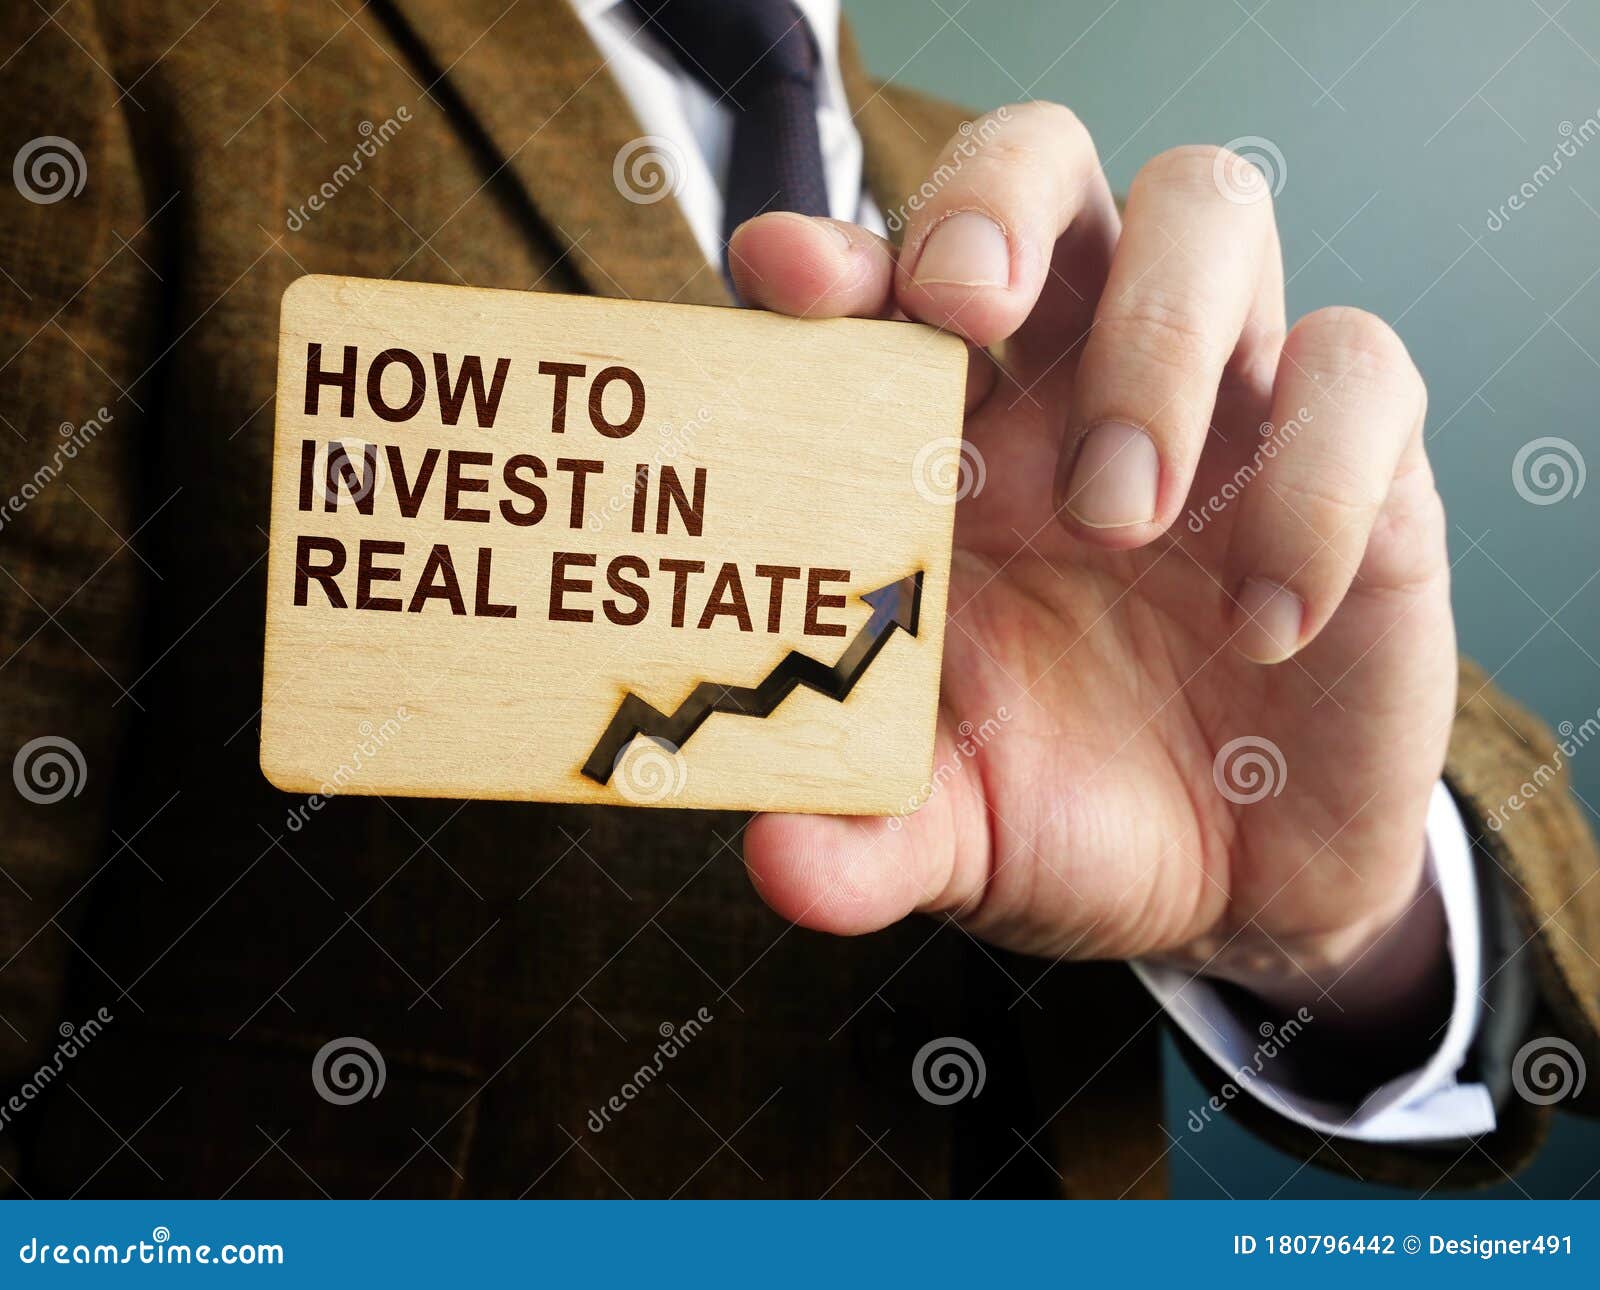 how to invest in real estate typed phrase on the plate